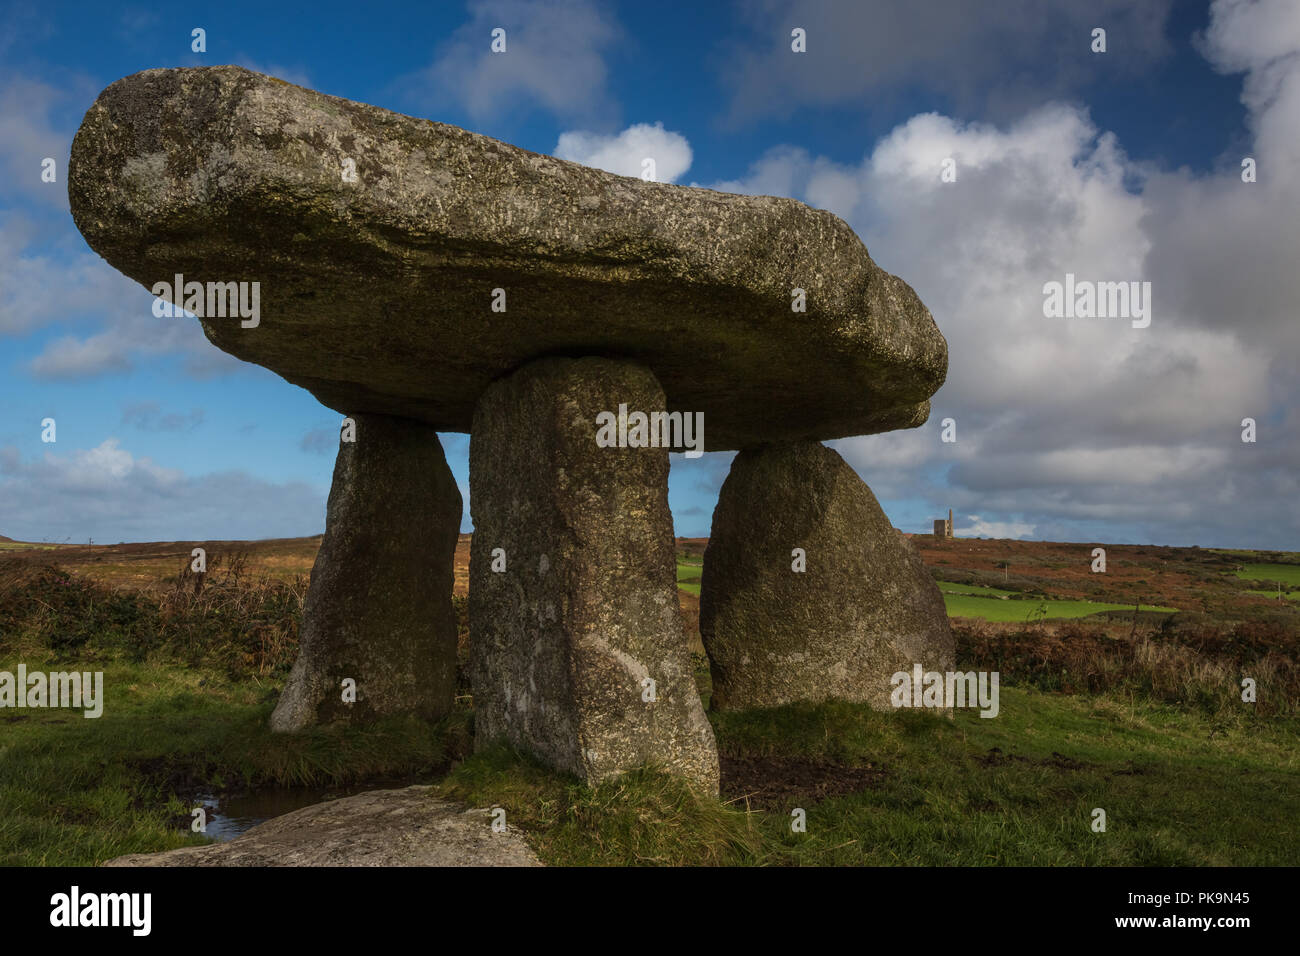 Lanyon Quoit con Ding Dong miniera in background, vicino a St Ives, Cornwall, Regno Unito Foto Stock